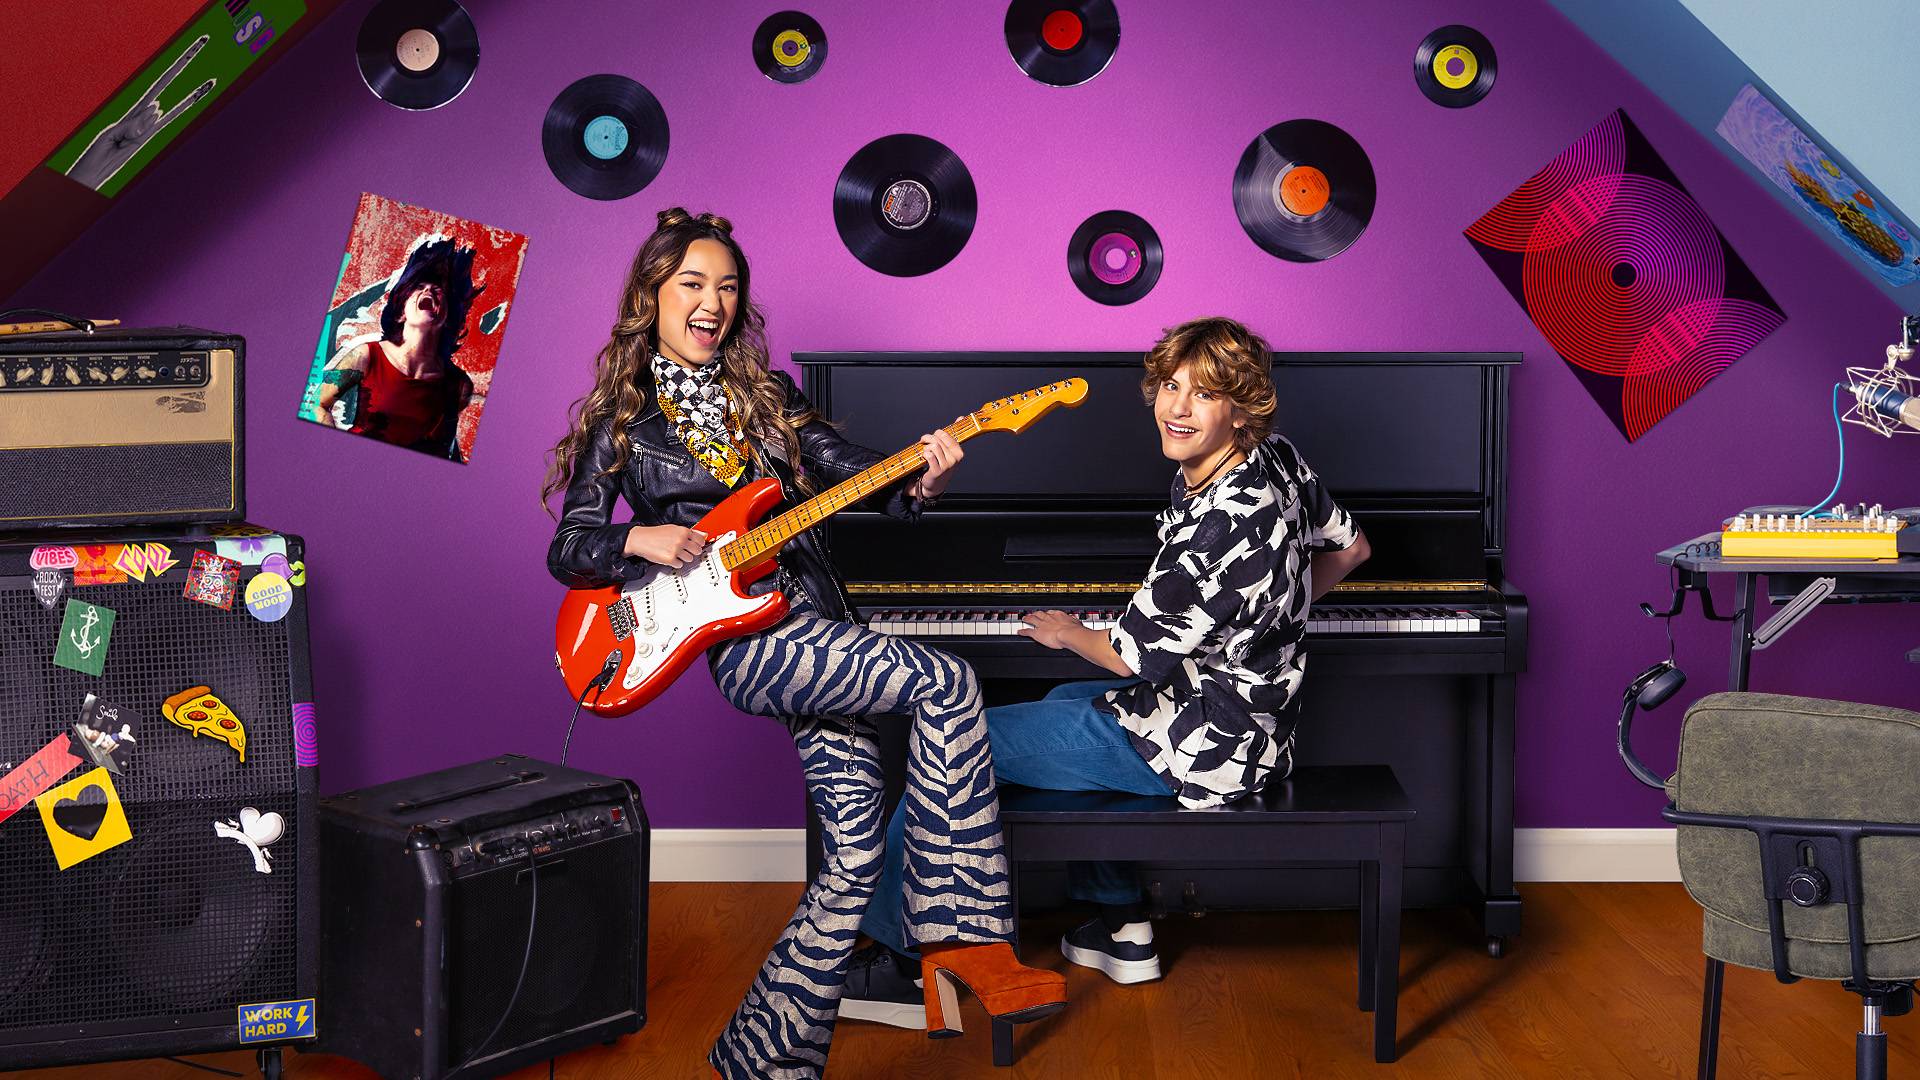 Erin, played by Ava Ro, plays a red guitar wearing black and white zebra pants and red shoes.  Aaron, played by Jensen Gering sits playing the piano.